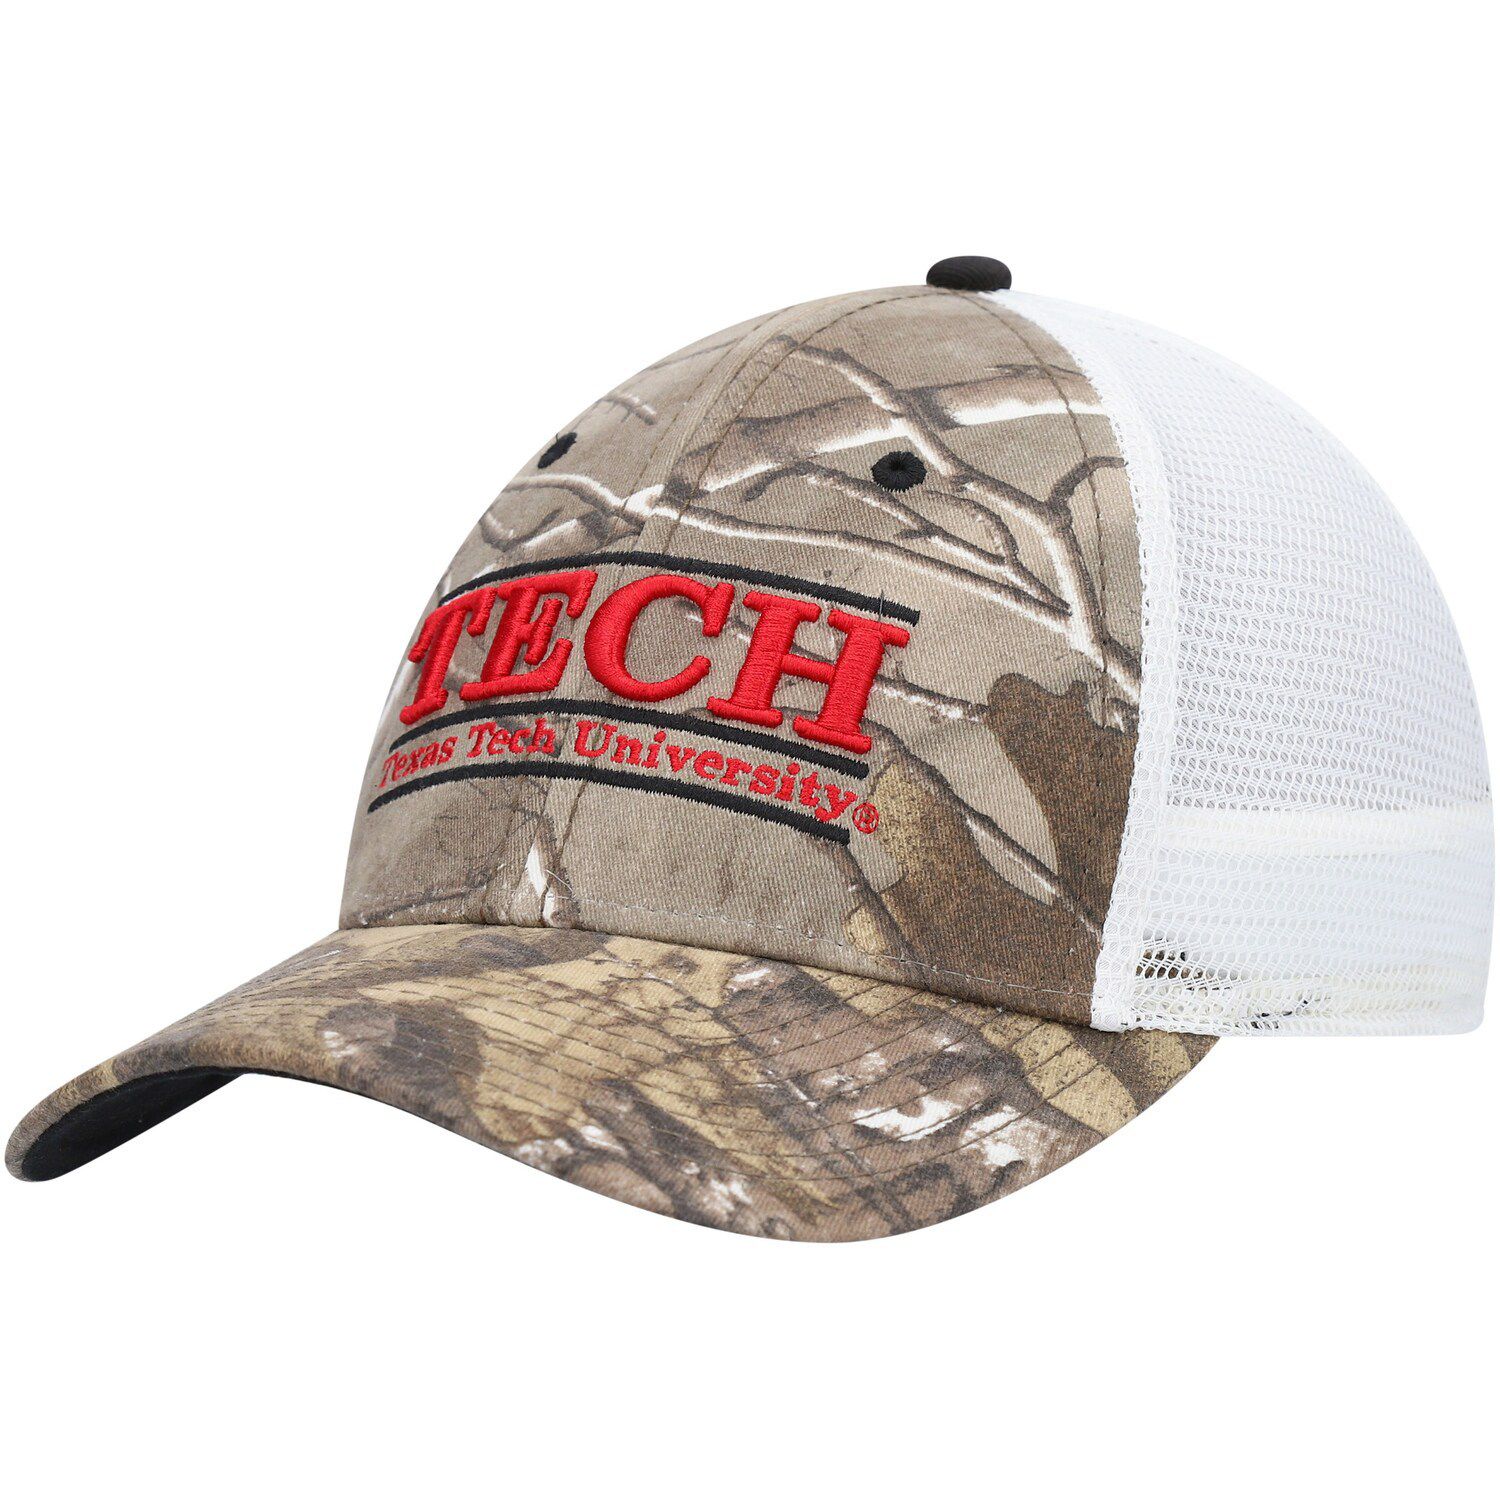 Image for Unbranded Men's The Game Realtree Camo Texas Tech Red Raiders Xtra Trucker Snapback Hat at Kohl's.